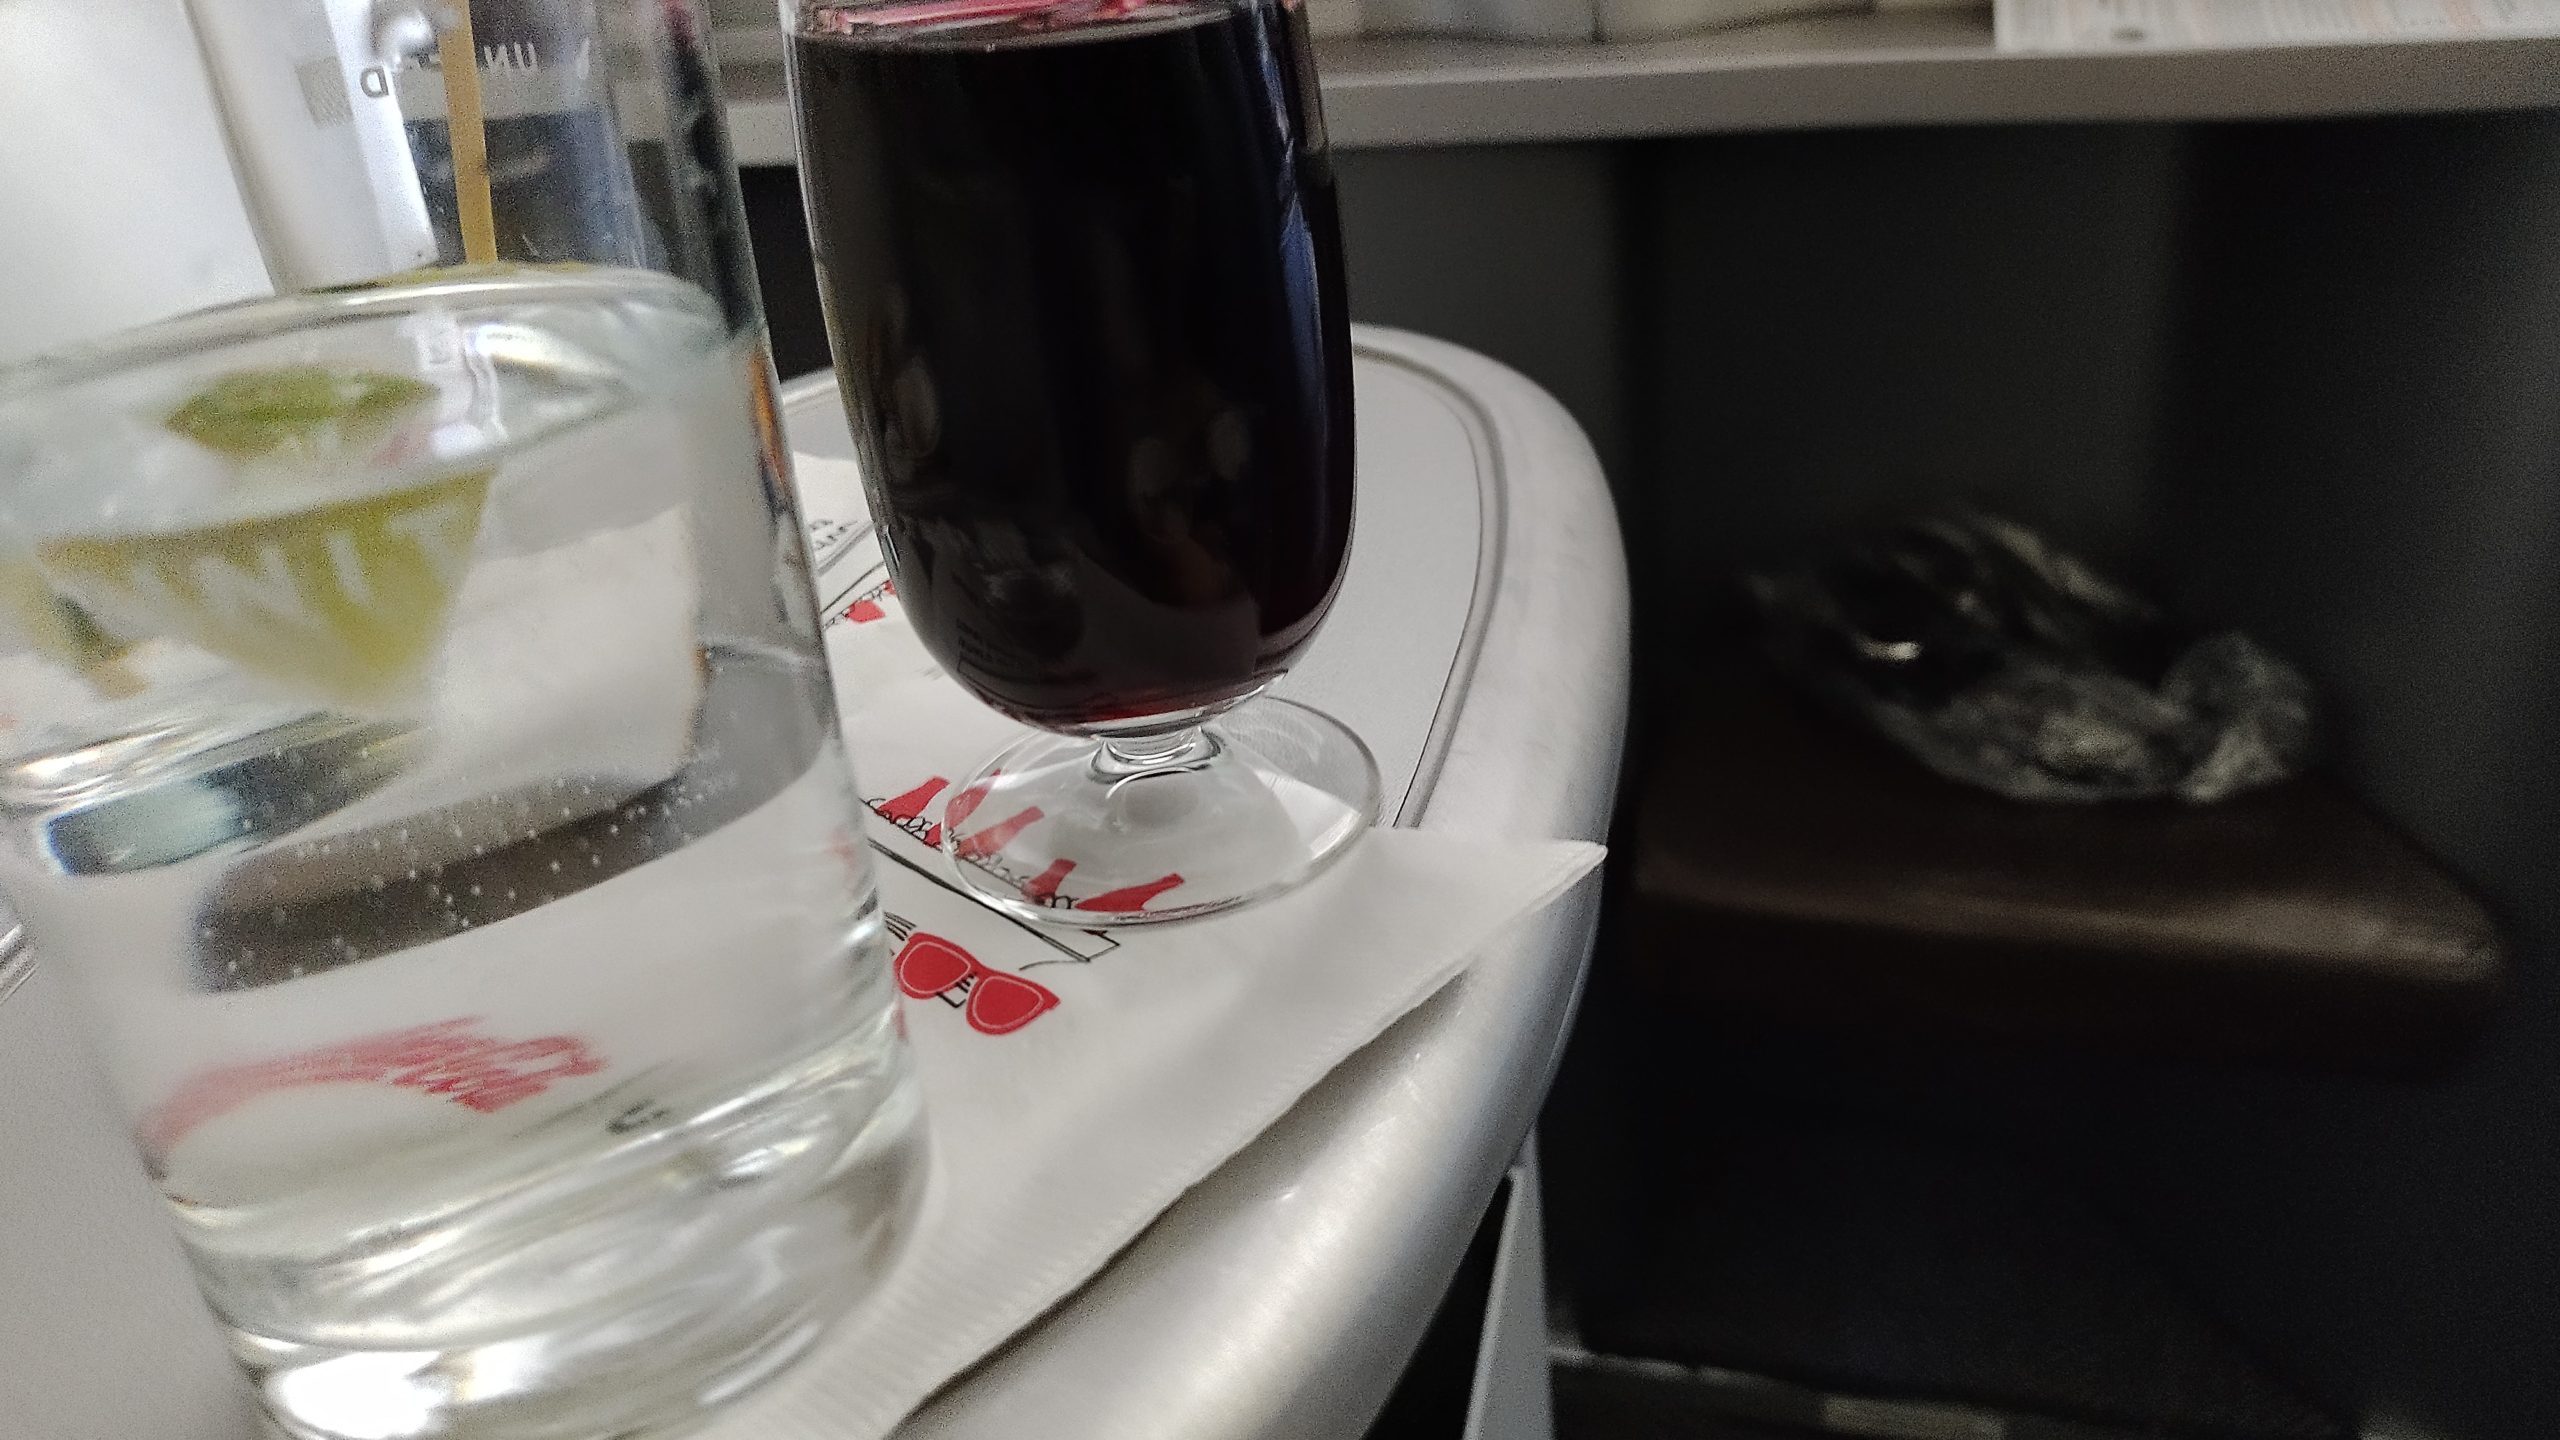 picture of a glass of wine and the glass of water served on the flight